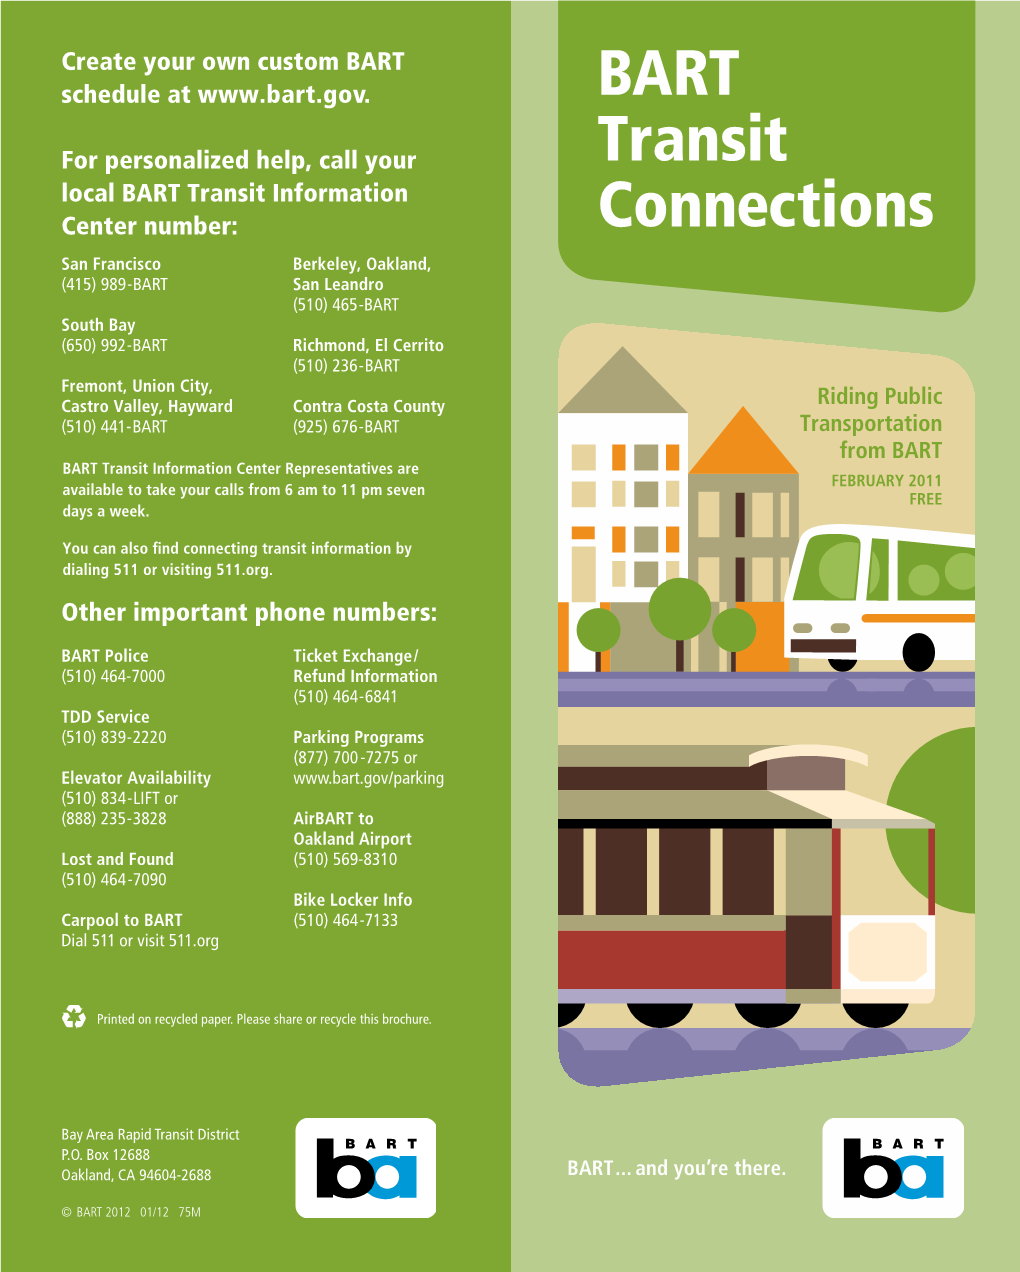 BART Transit Connections